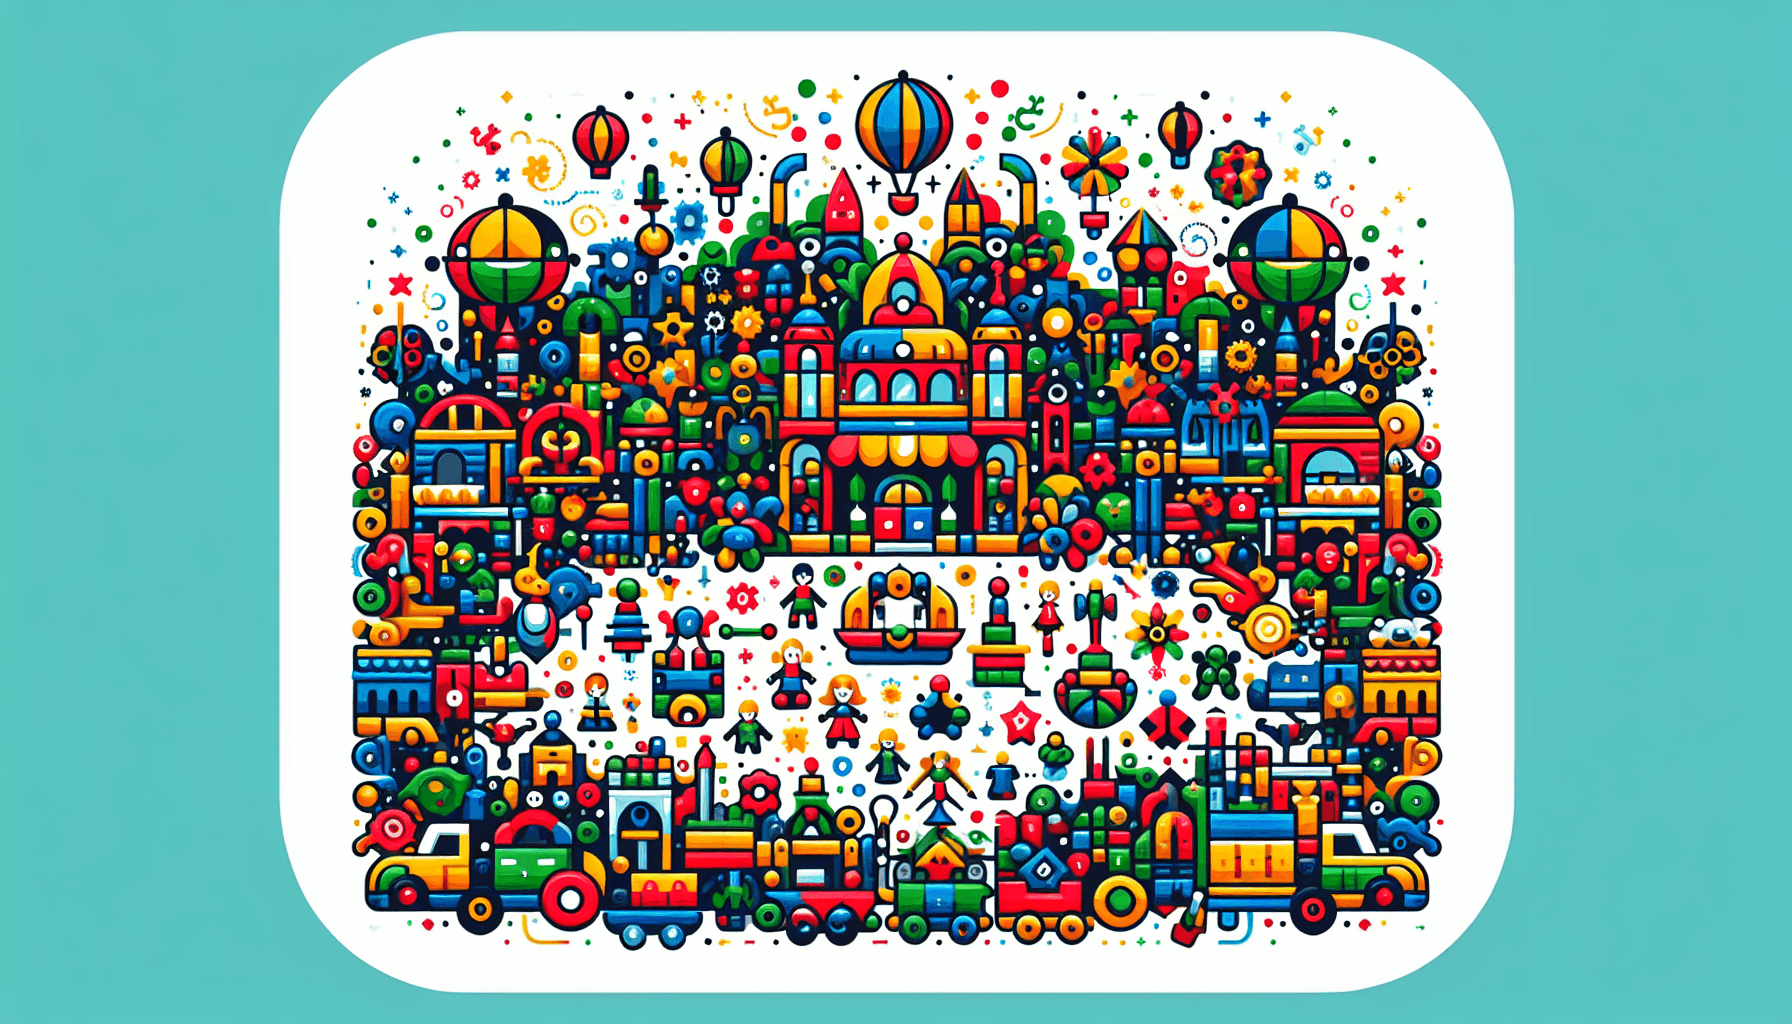 Toy empire in flat illustration style and white background, red #f47574, green #88c7a8, yellow #fcc44b, and blue #645bc8 colors.